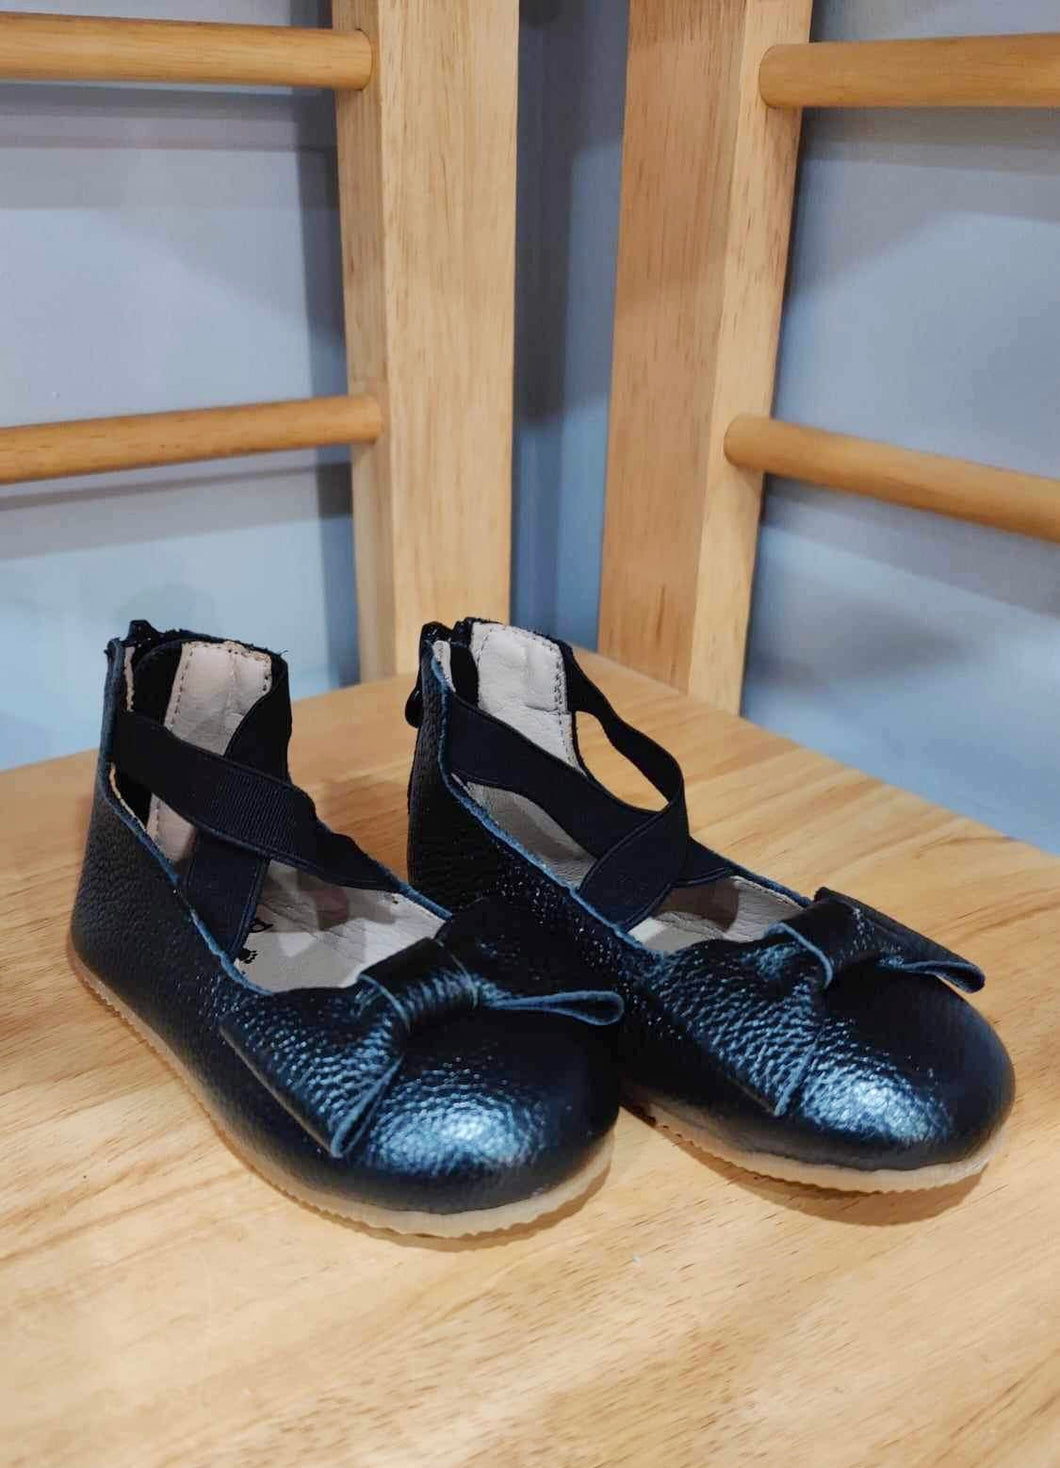 Riley & Co Black Bow Shoes Size 6